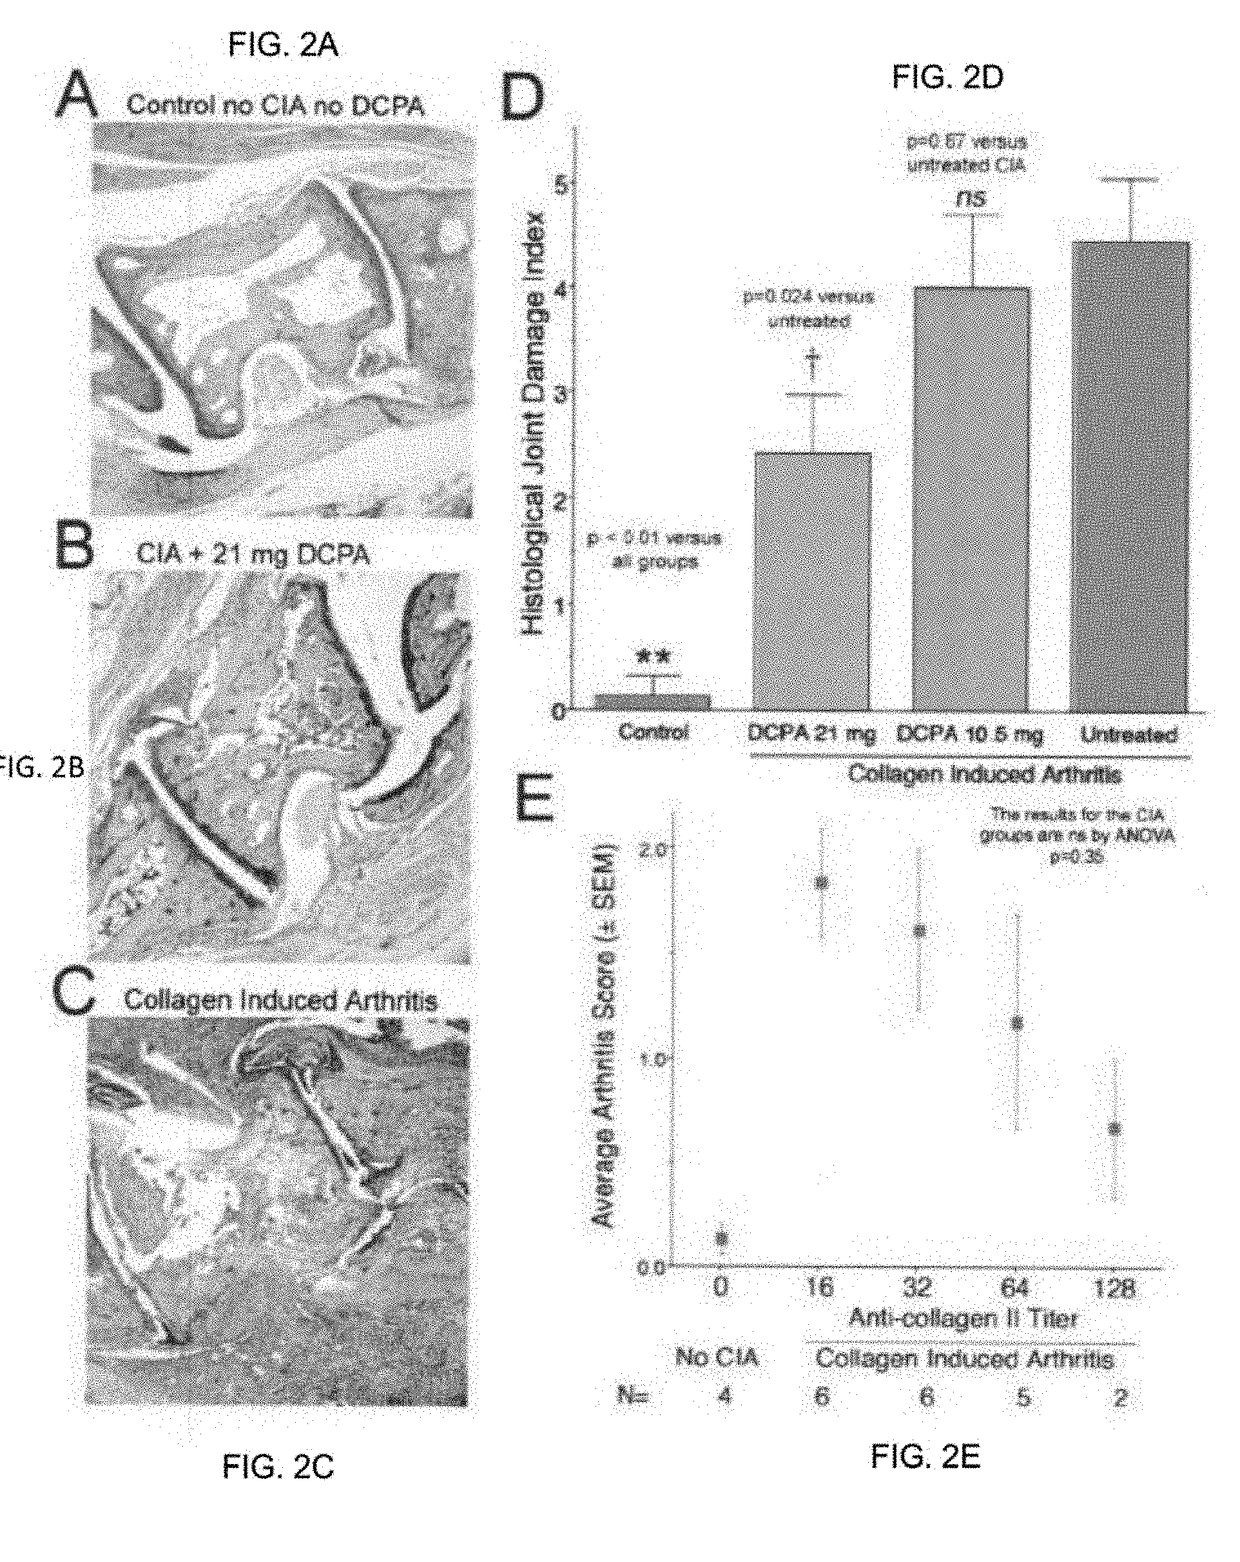 Water Soluble Haloanilide Calcium-Release Calcium Channel Inhibitory Compounds and Methods to Control Bone Erosion and Inflammation Associated with Arthritides